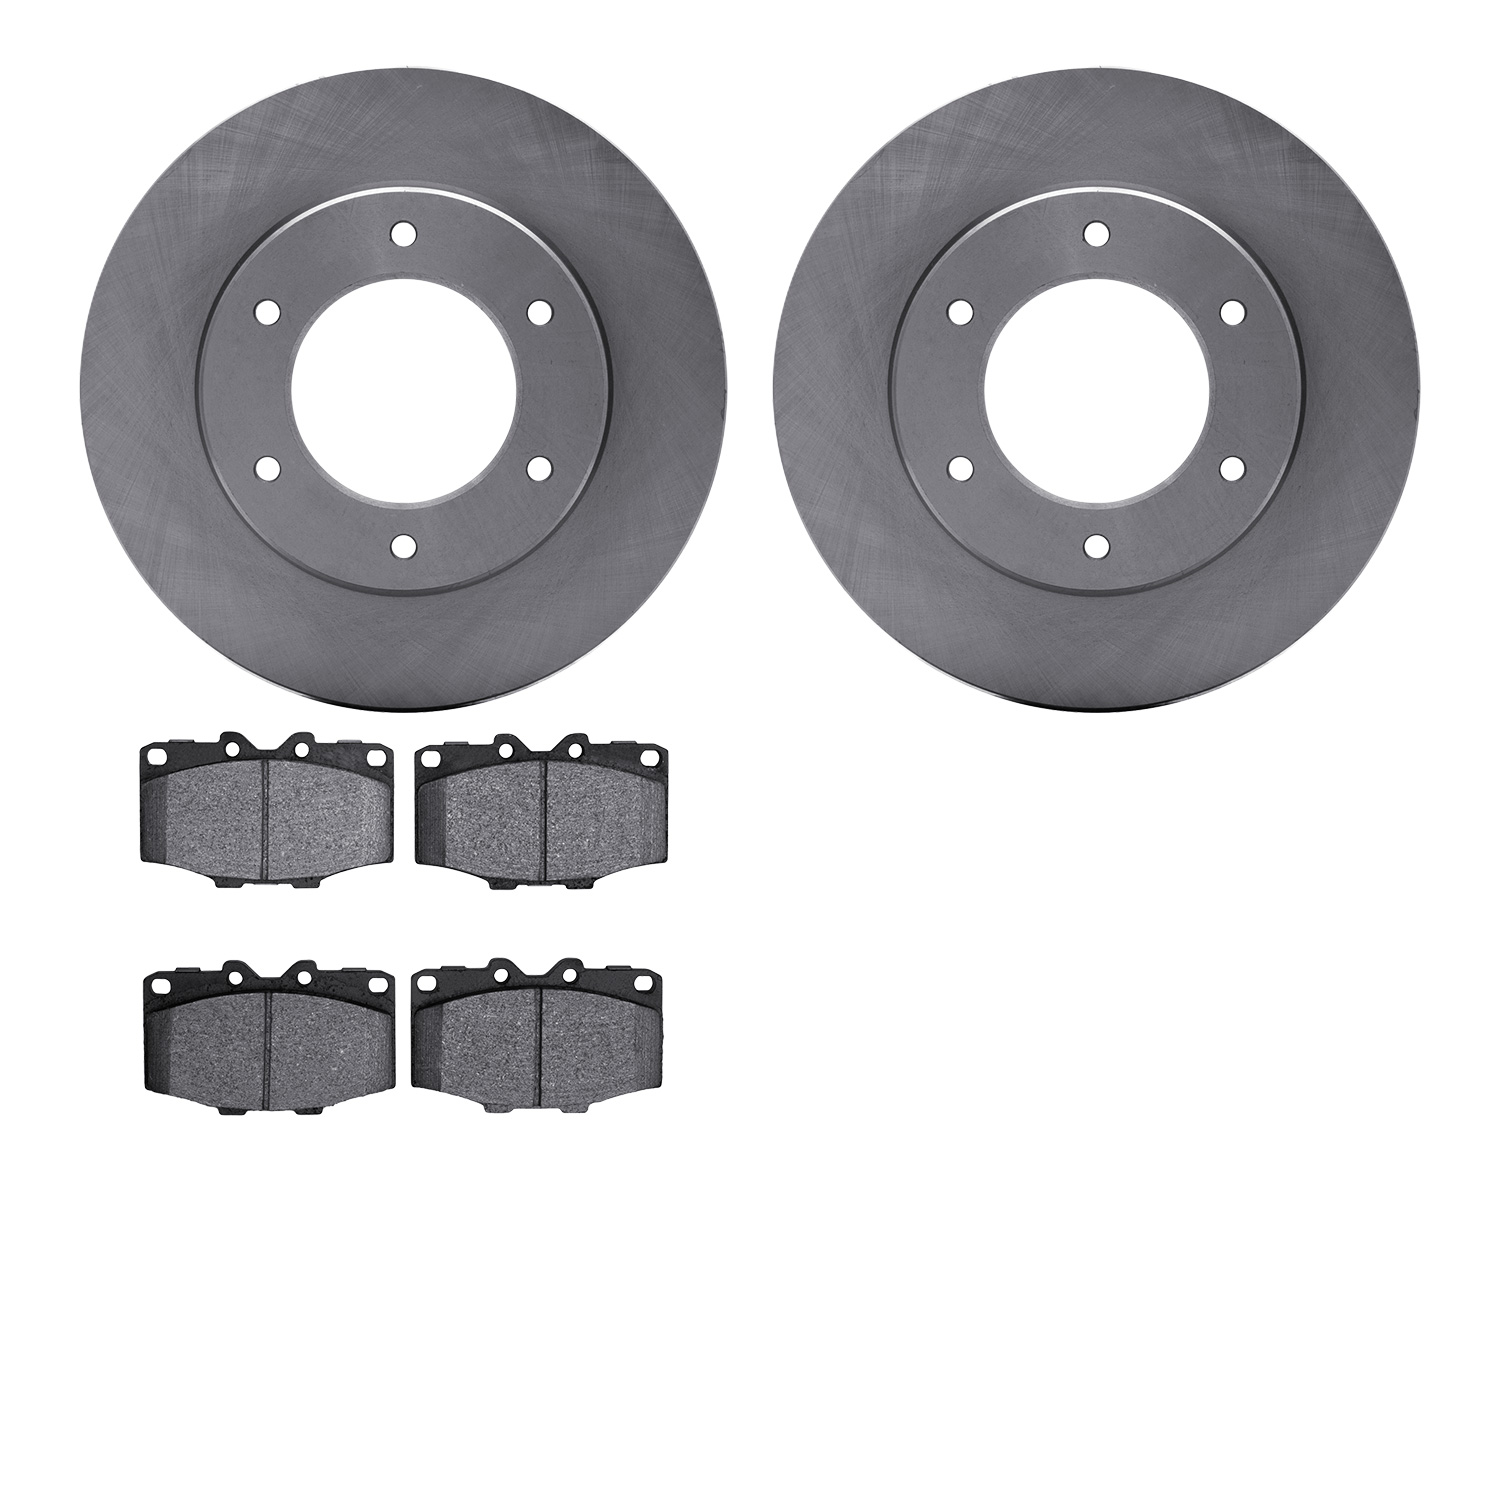 6402-76004 Brake Rotors with Ultimate-Duty Brake Pads, 1979-1980 Lexus/Toyota/Scion, Position: Front